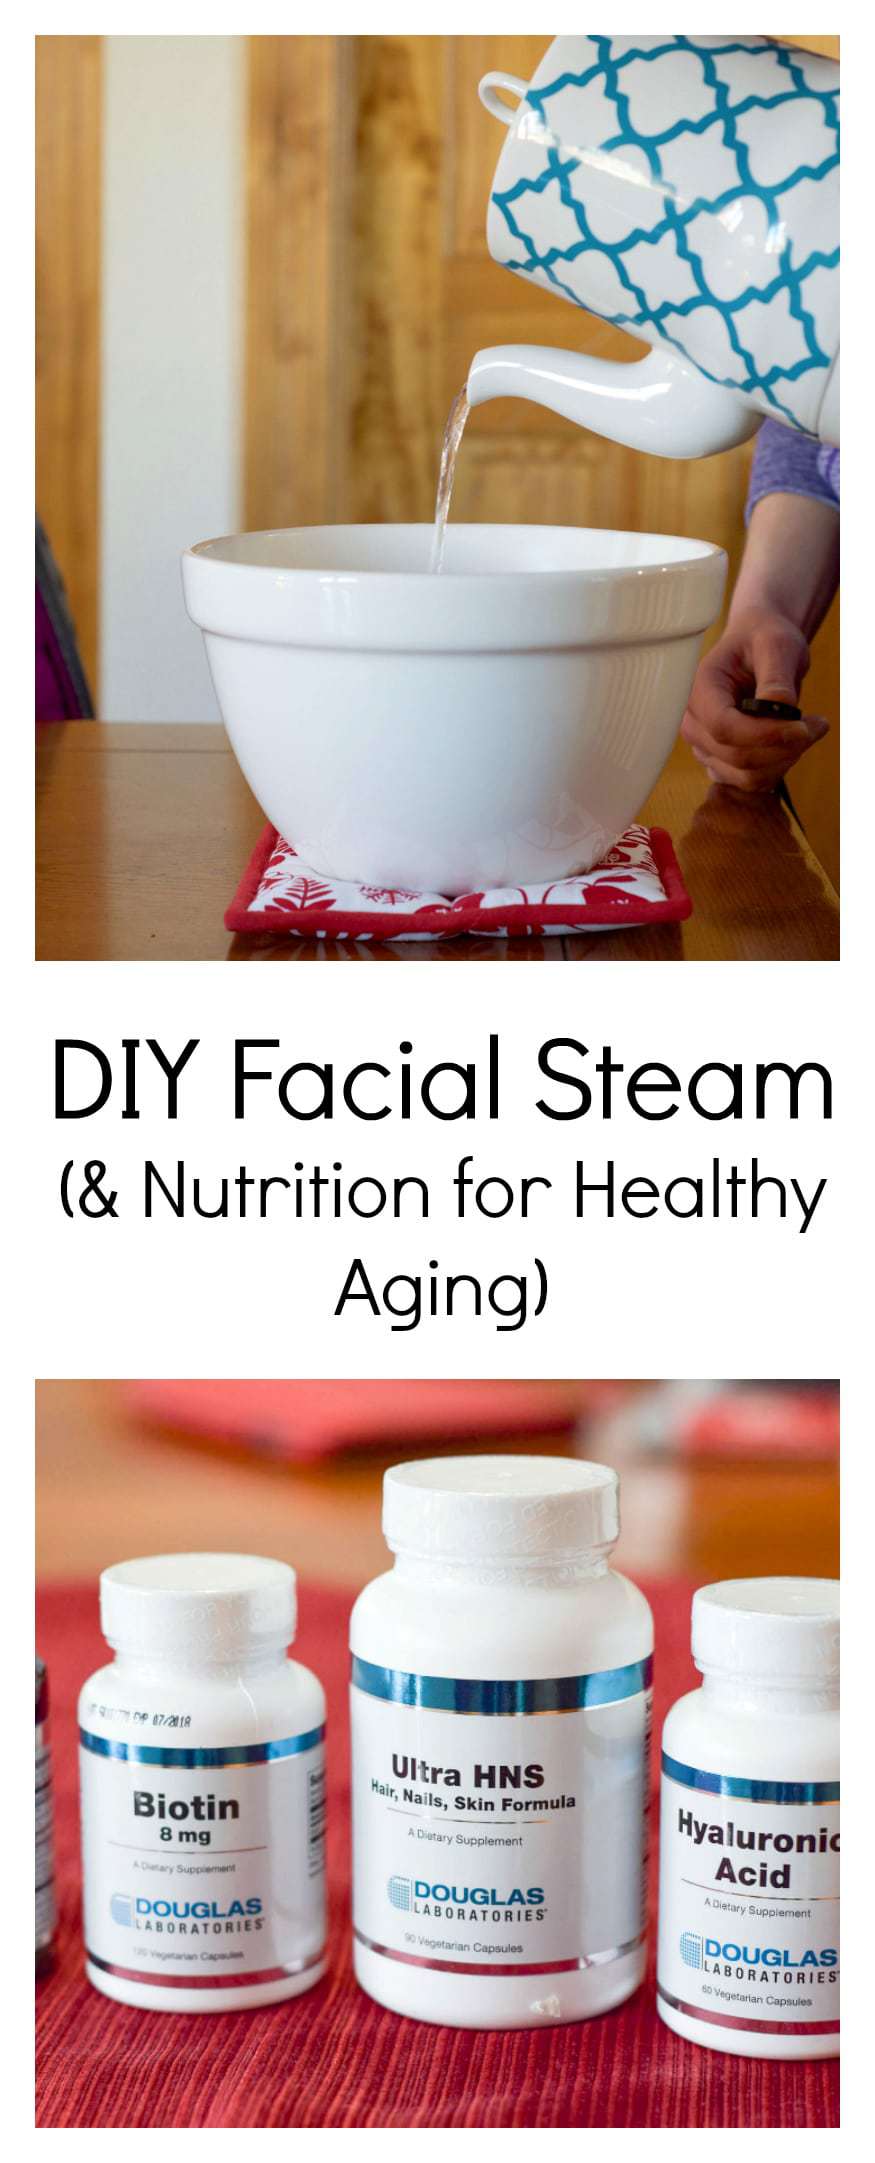 DIY Facial Steam (and Nutrition for Healthy Aging) - @TheFitCookie #AD @DouglasLabs #BeautyFromWithin